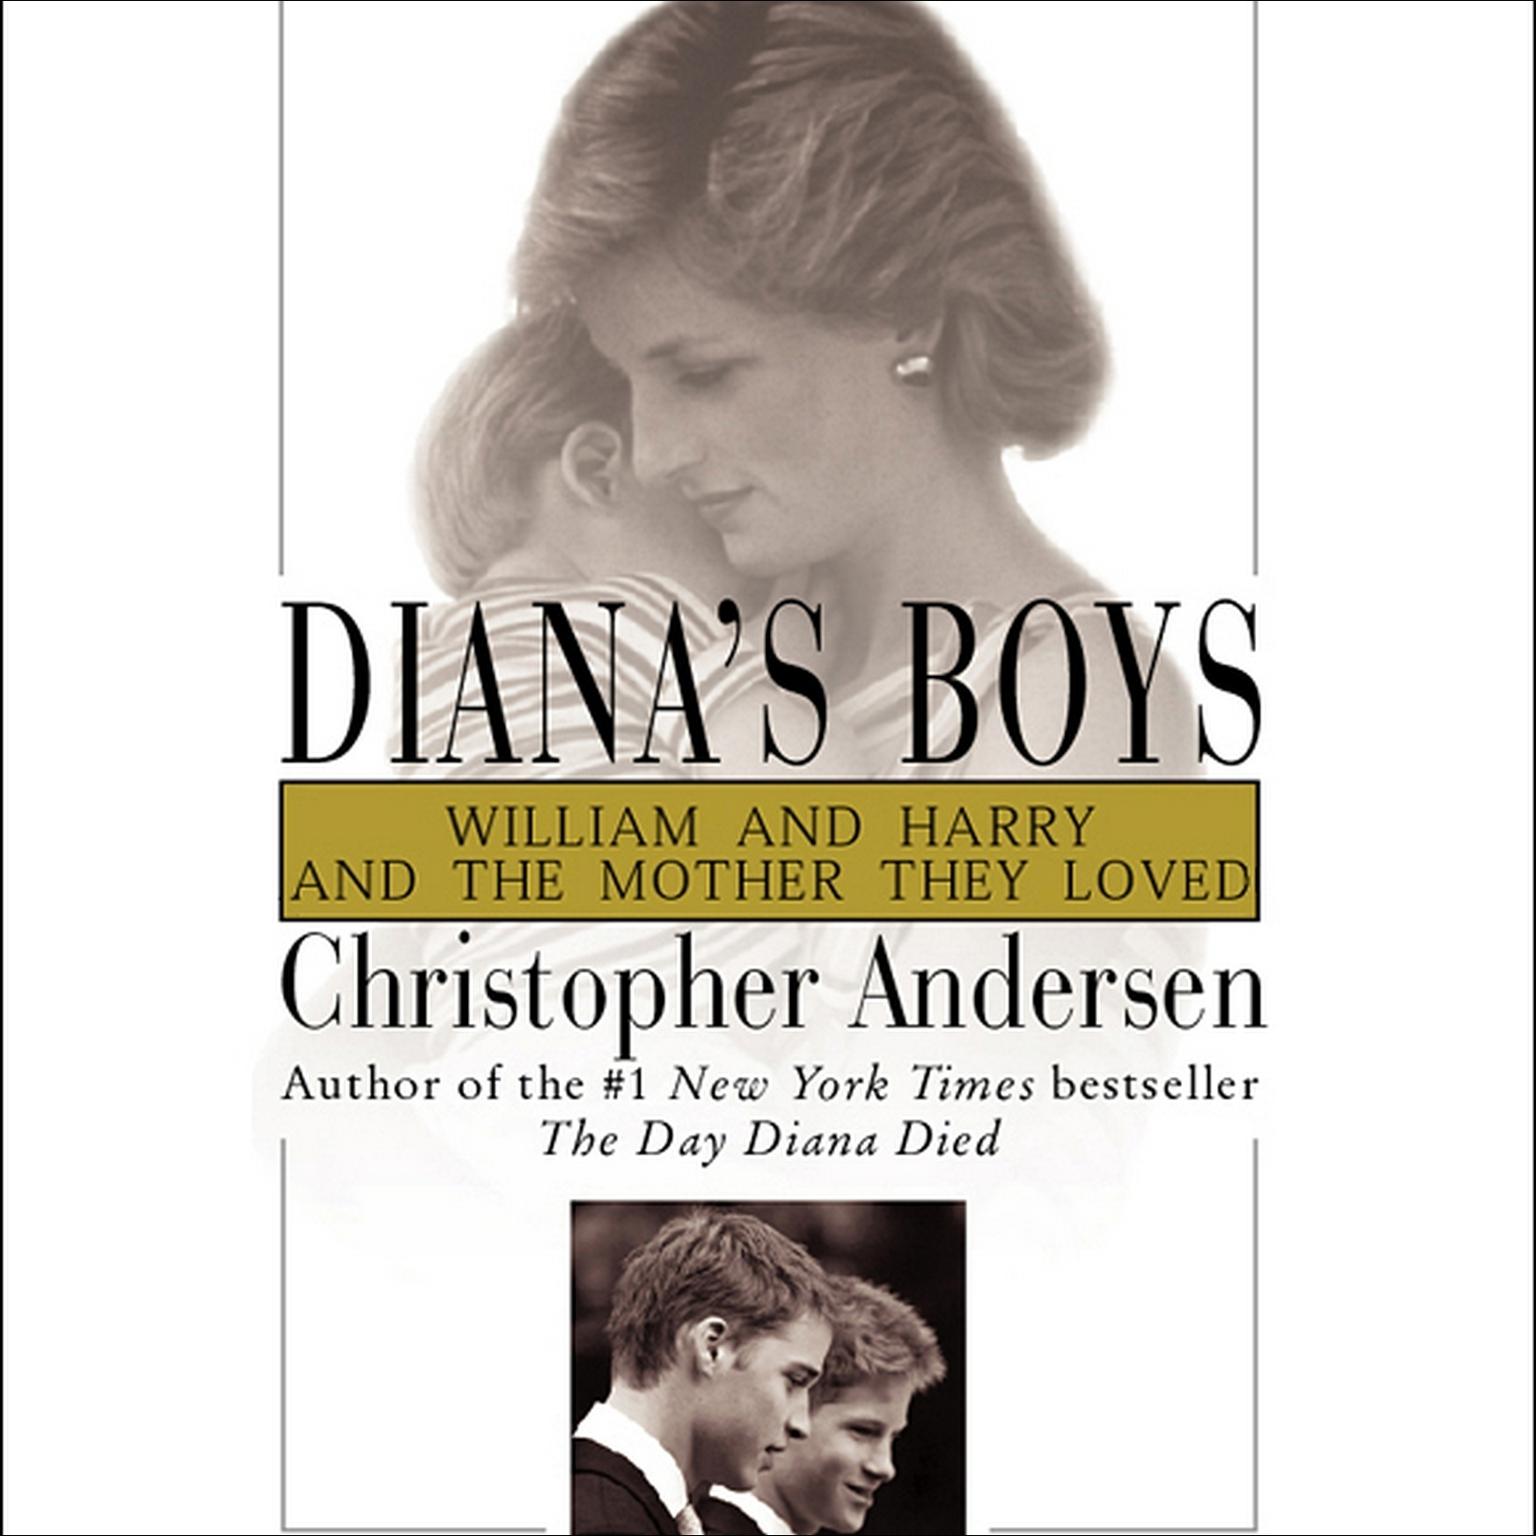 Dianas Boys (Abridged): William and Harry and the Mother They Loved Audiobook, by Christopher Andersen